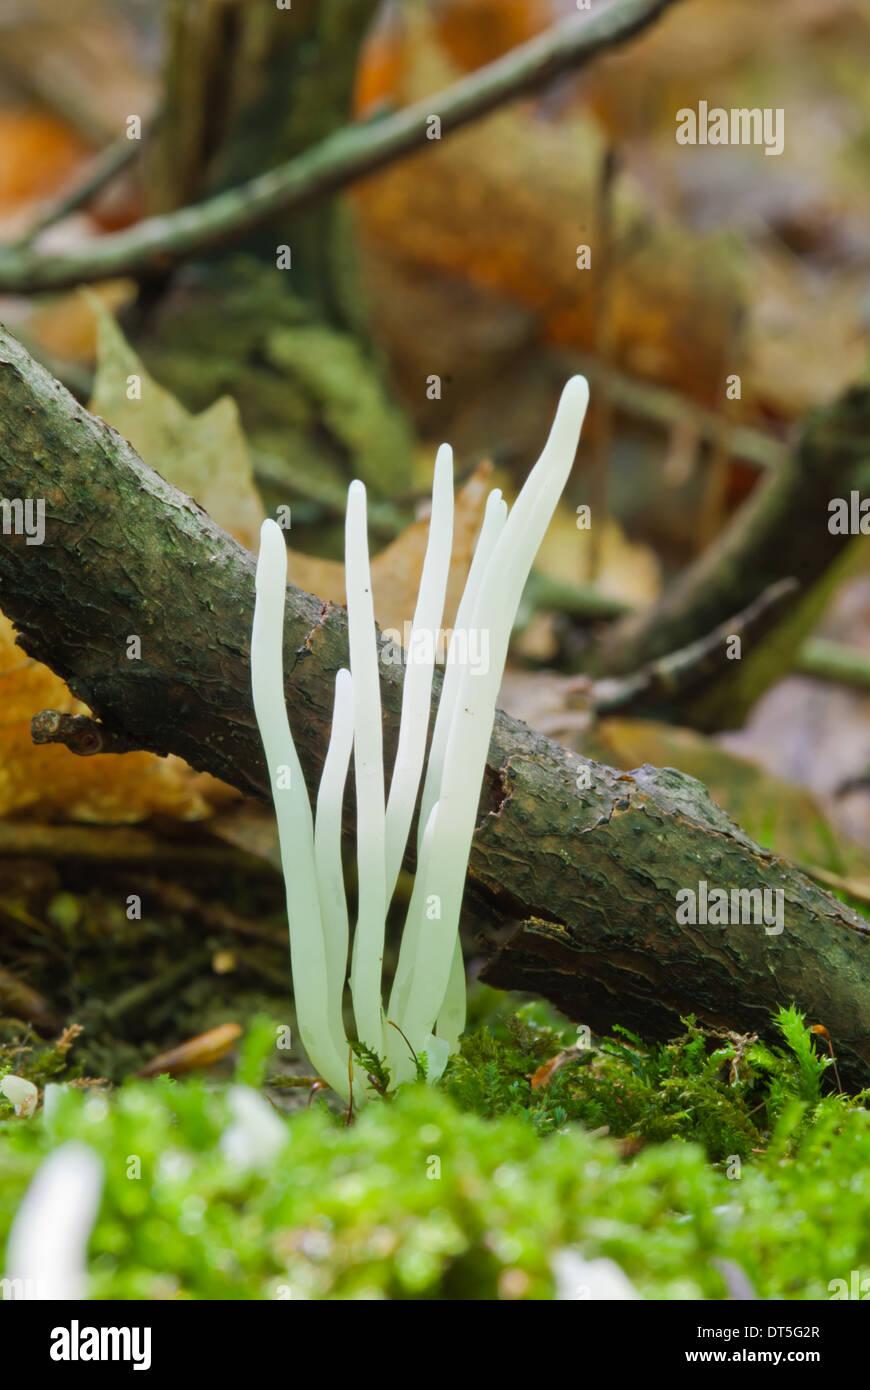 worm-like-coral-fungus-clavaria-vermicularis-growing-in-moss-on-the-DT5G2R.jpg